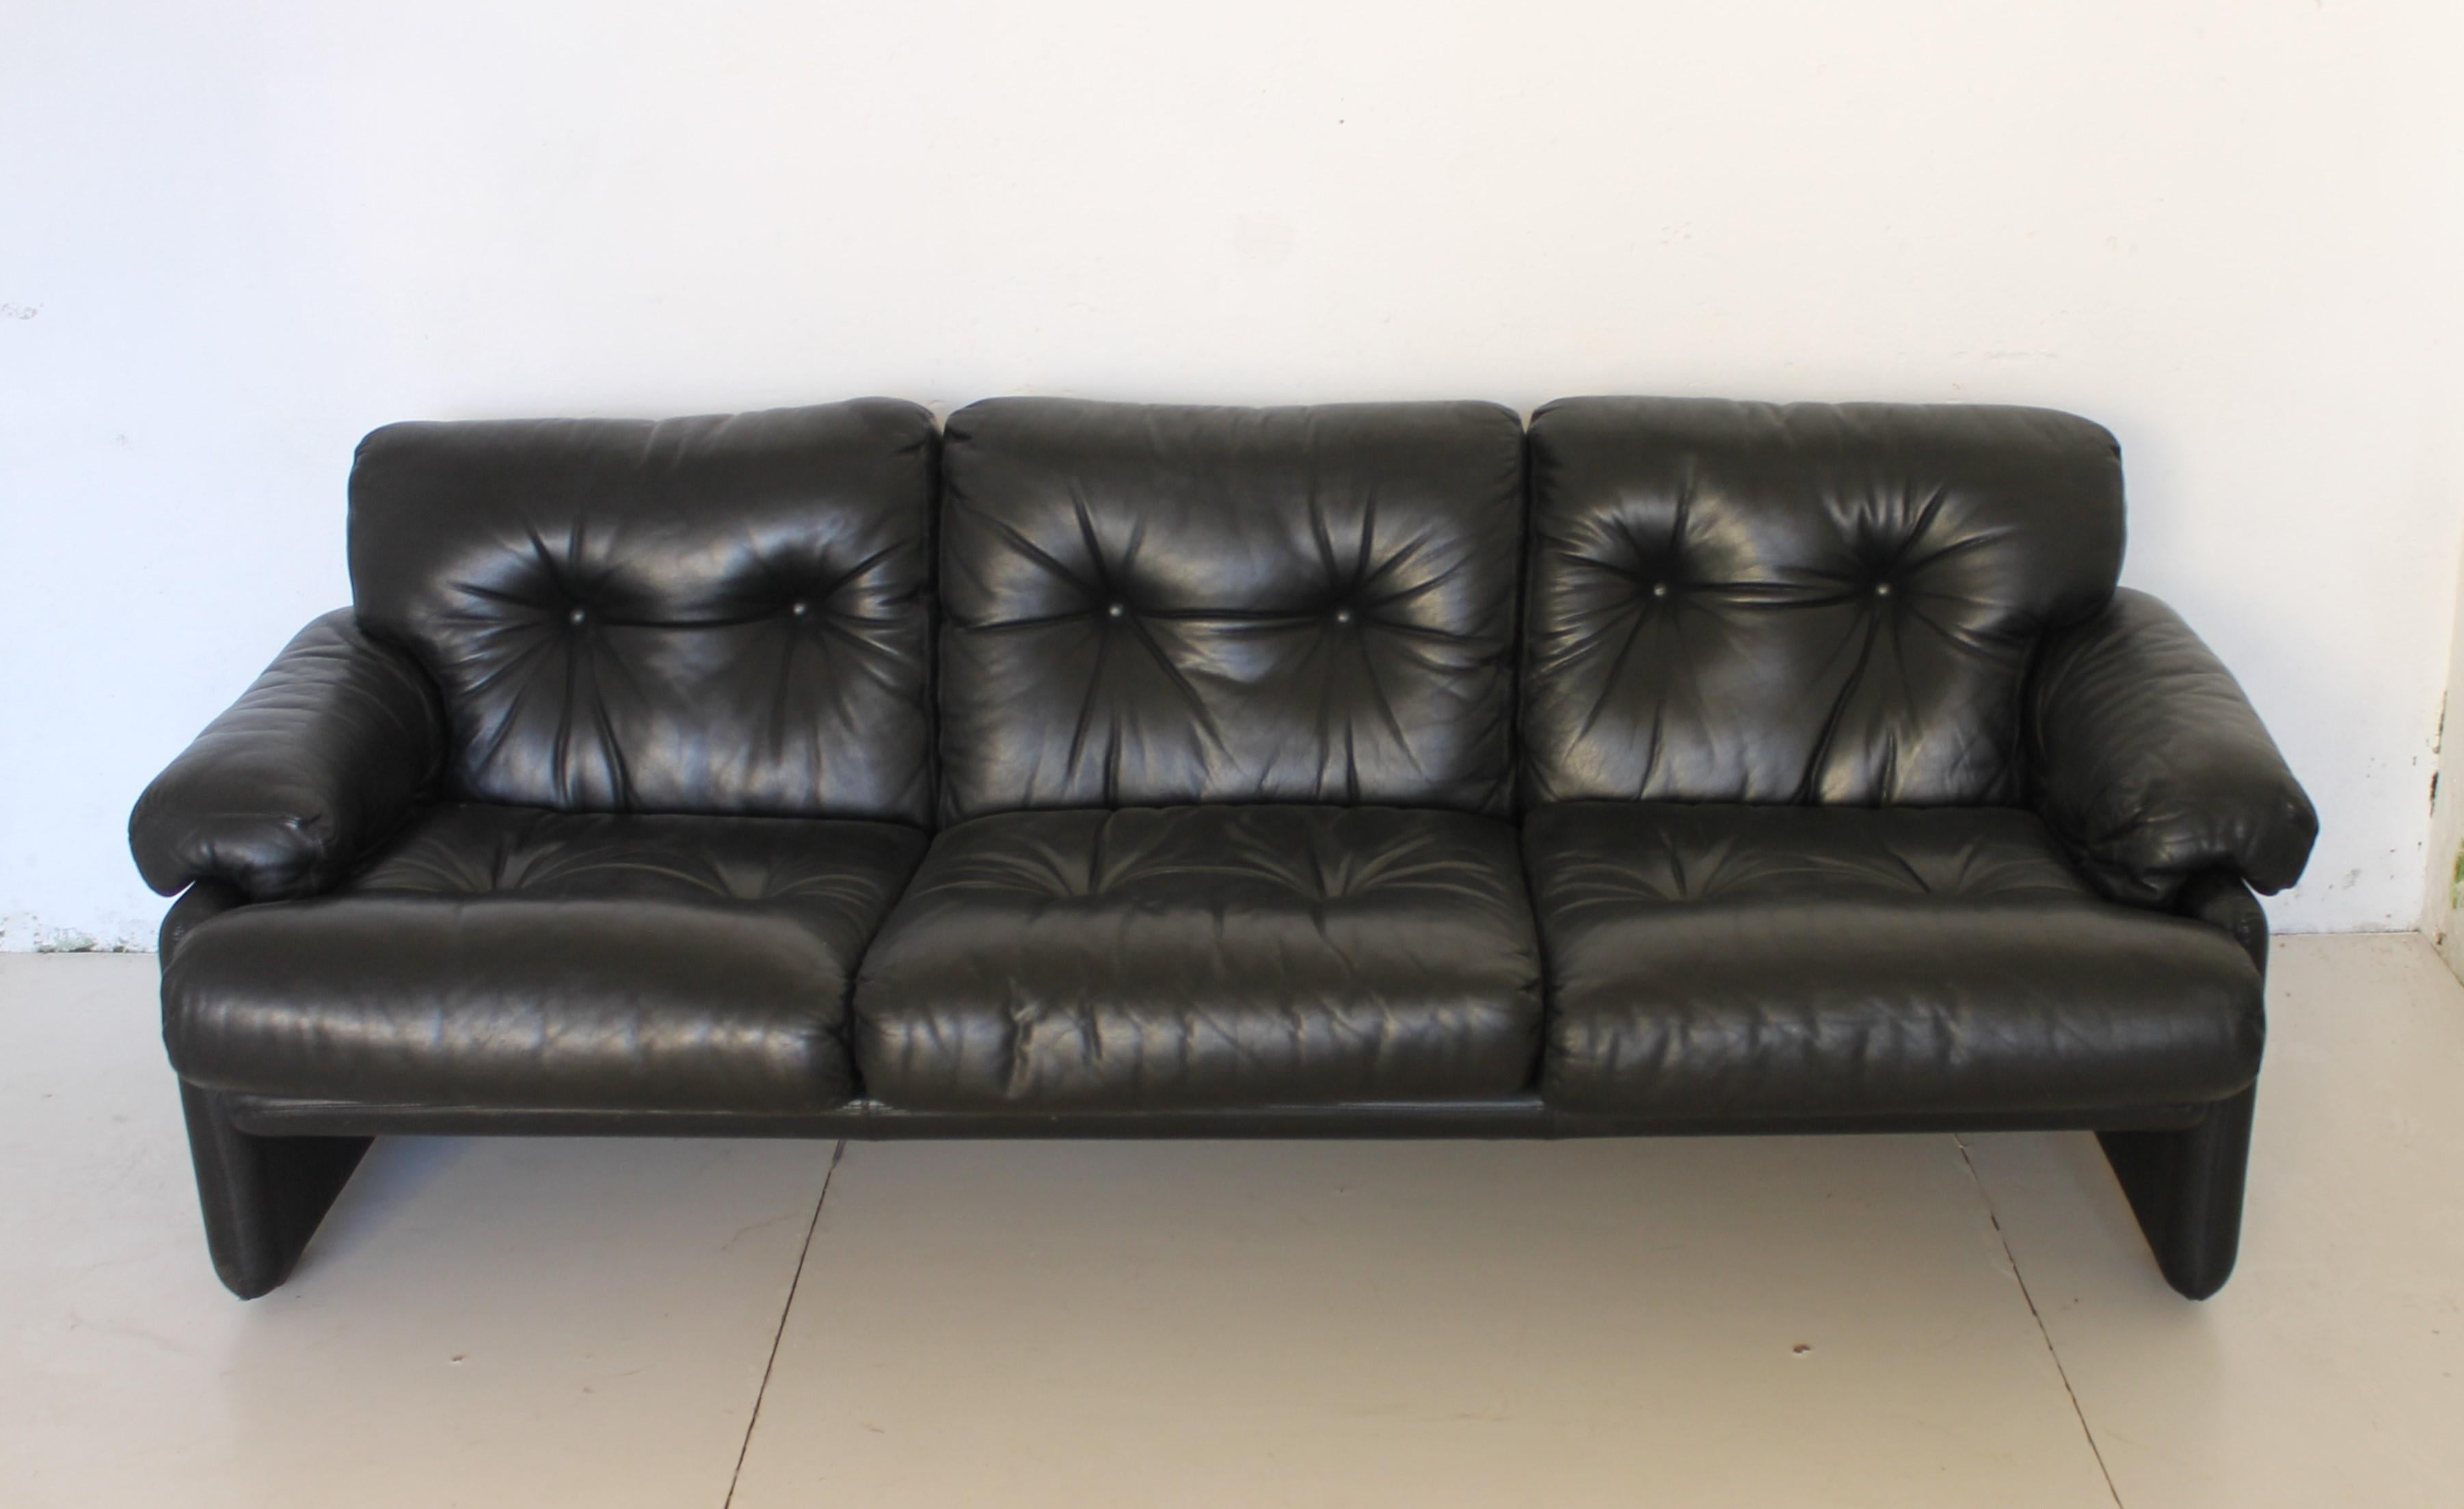 Coronado sofa designed by Tobia Scarpa for B&B Italia. The project is dated 1966. Black leather, great condition.
  